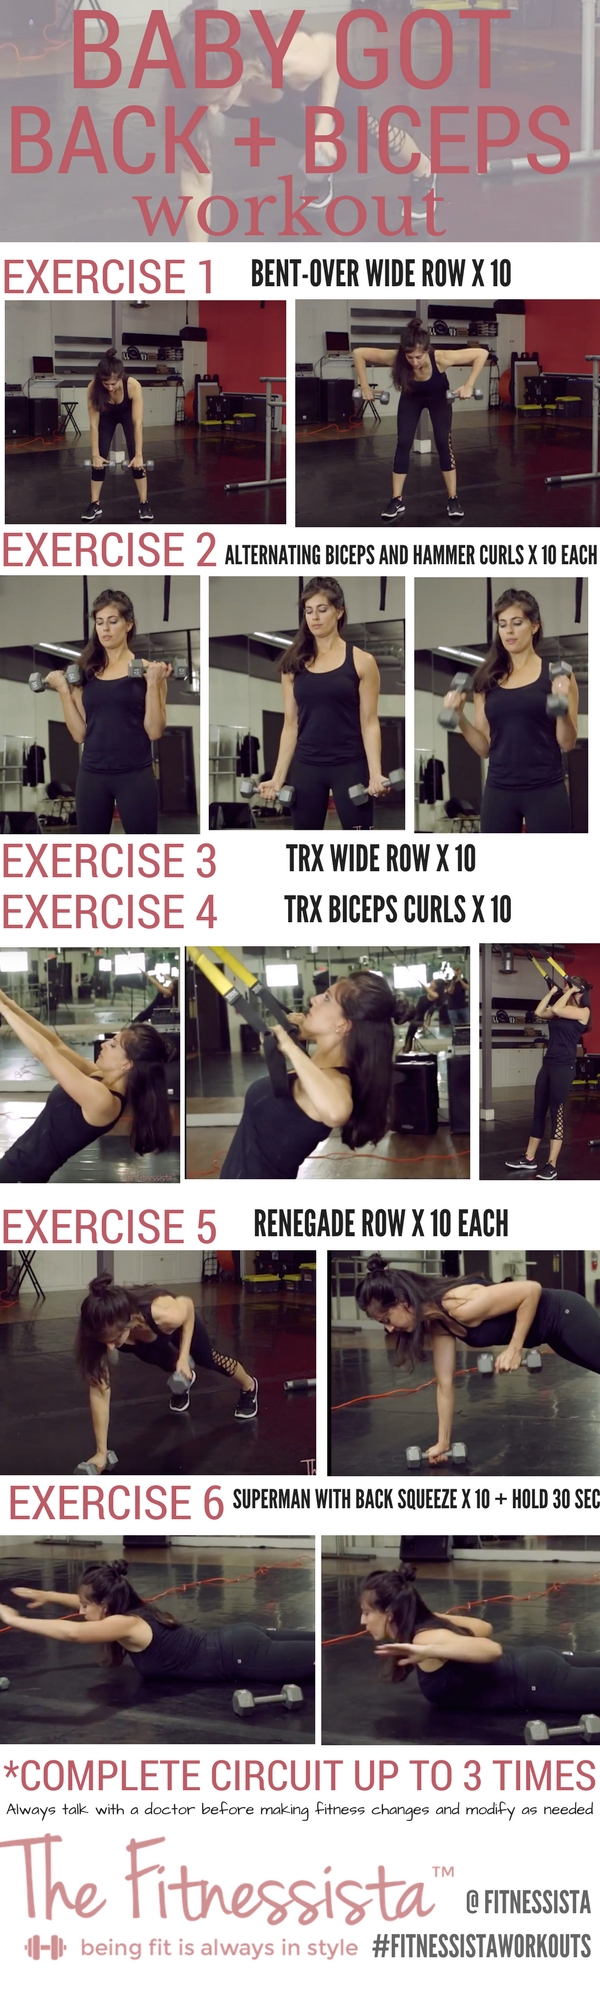 If you're working on your upper body for spring and summer, add this into your routine! This back and biceps circuit is an awesome combo of traditional strength + TRX for strong and sexy back and biceps muscles. Check out fitnessista.com for the details + a video how-to